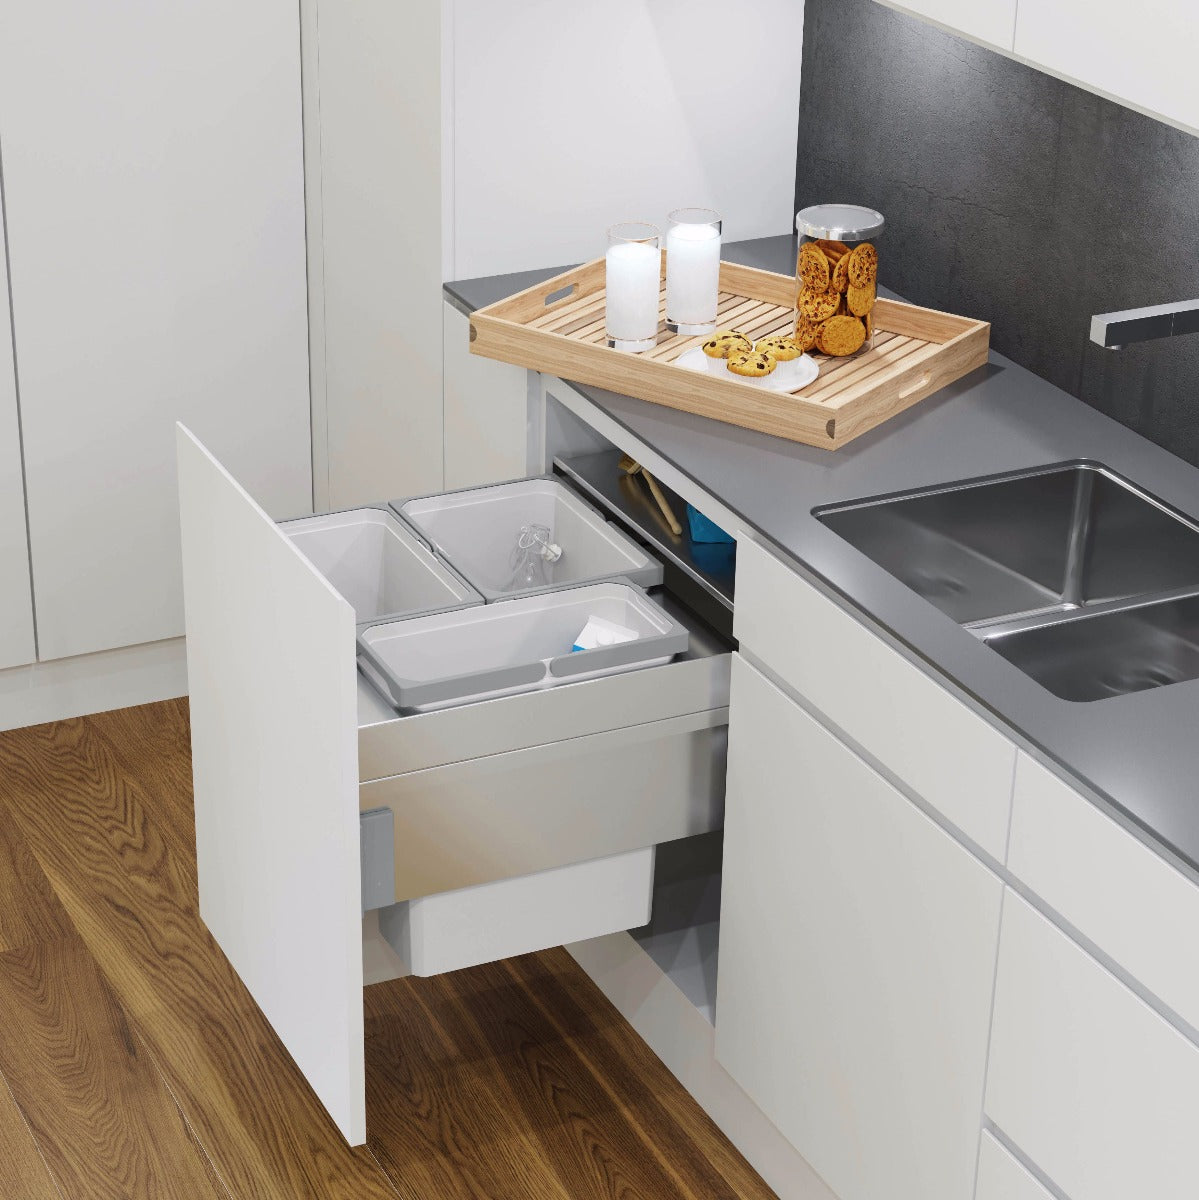 Vauth-Sagel pull-out integrated kitchen bin in silver grey with three compartments, ideal for separating waste and recycling